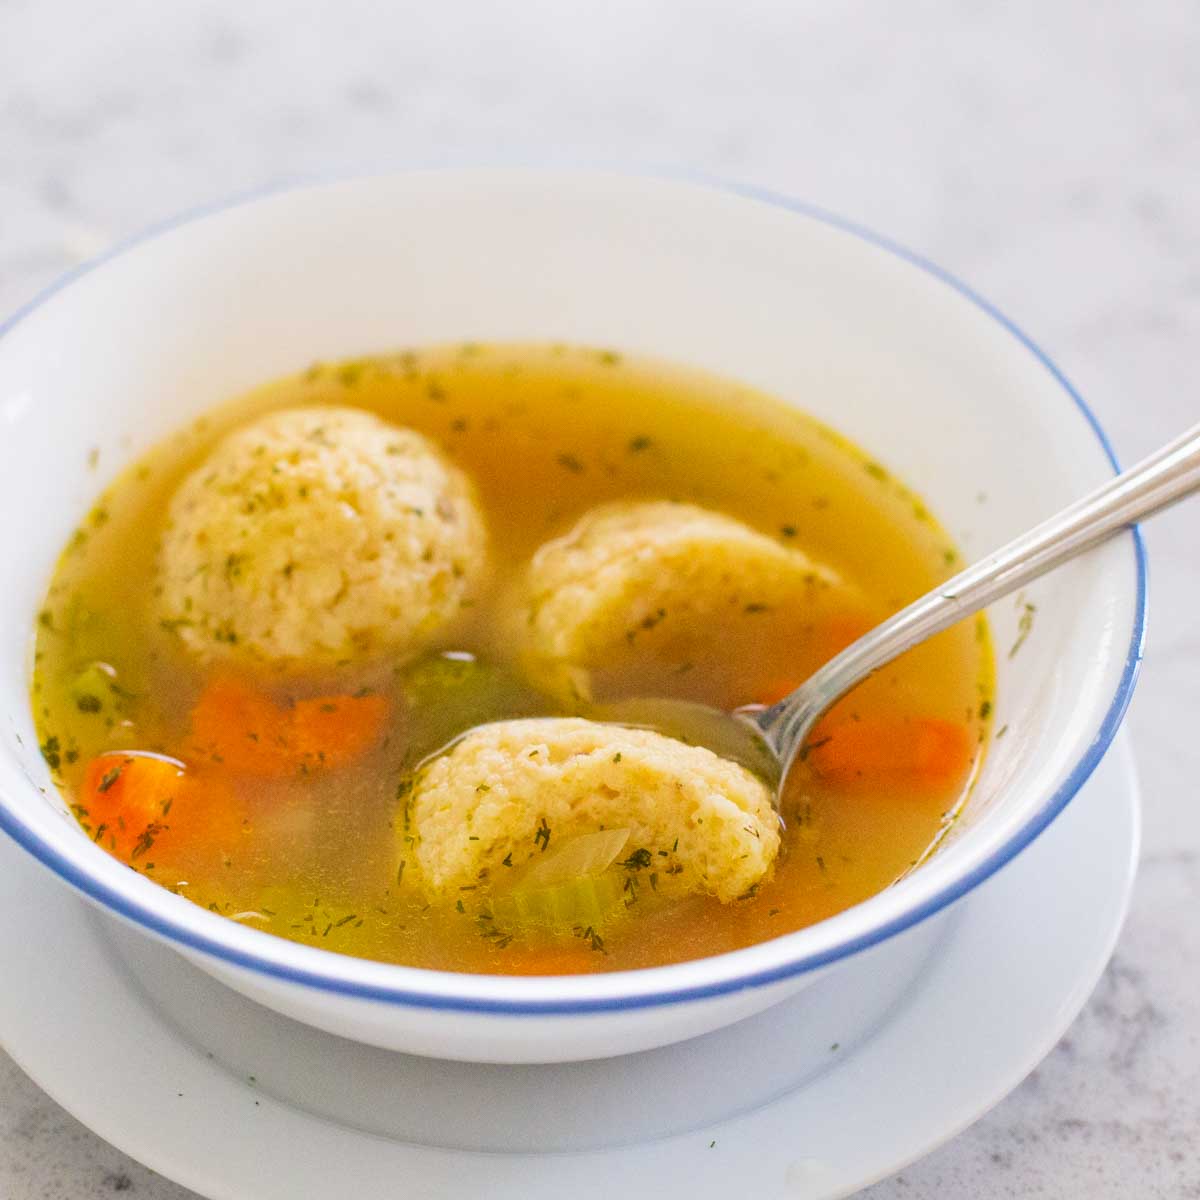 A serving of matzoh ball soup has a spoon cutting one of the balls in half to show the texture.